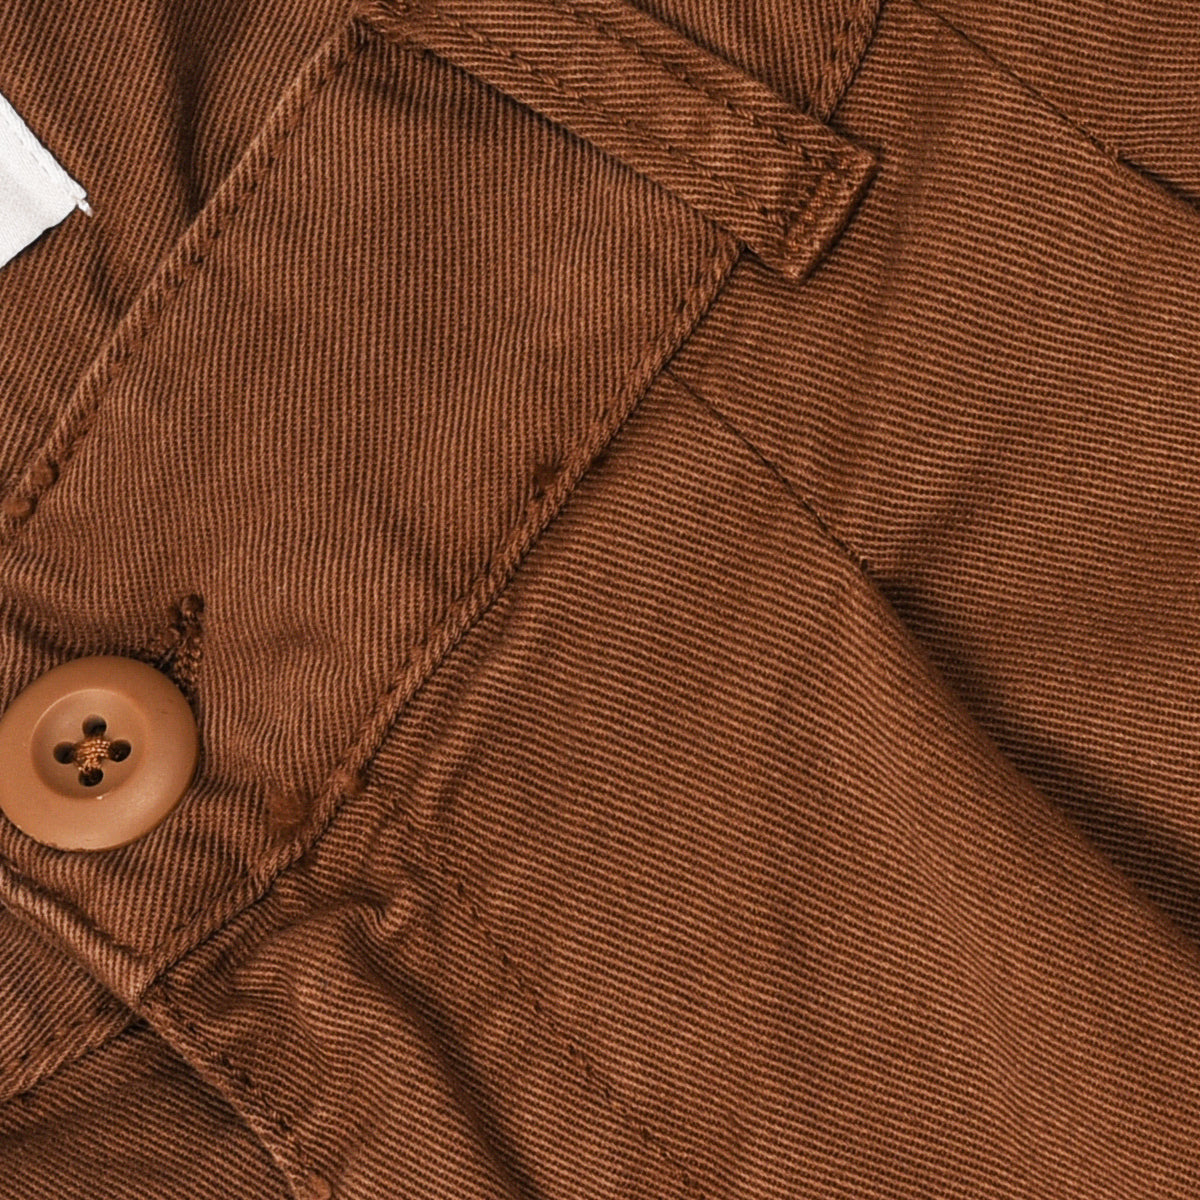 Carhartt WIP Collins Pant Women's - In sale now! – SUEDE Store